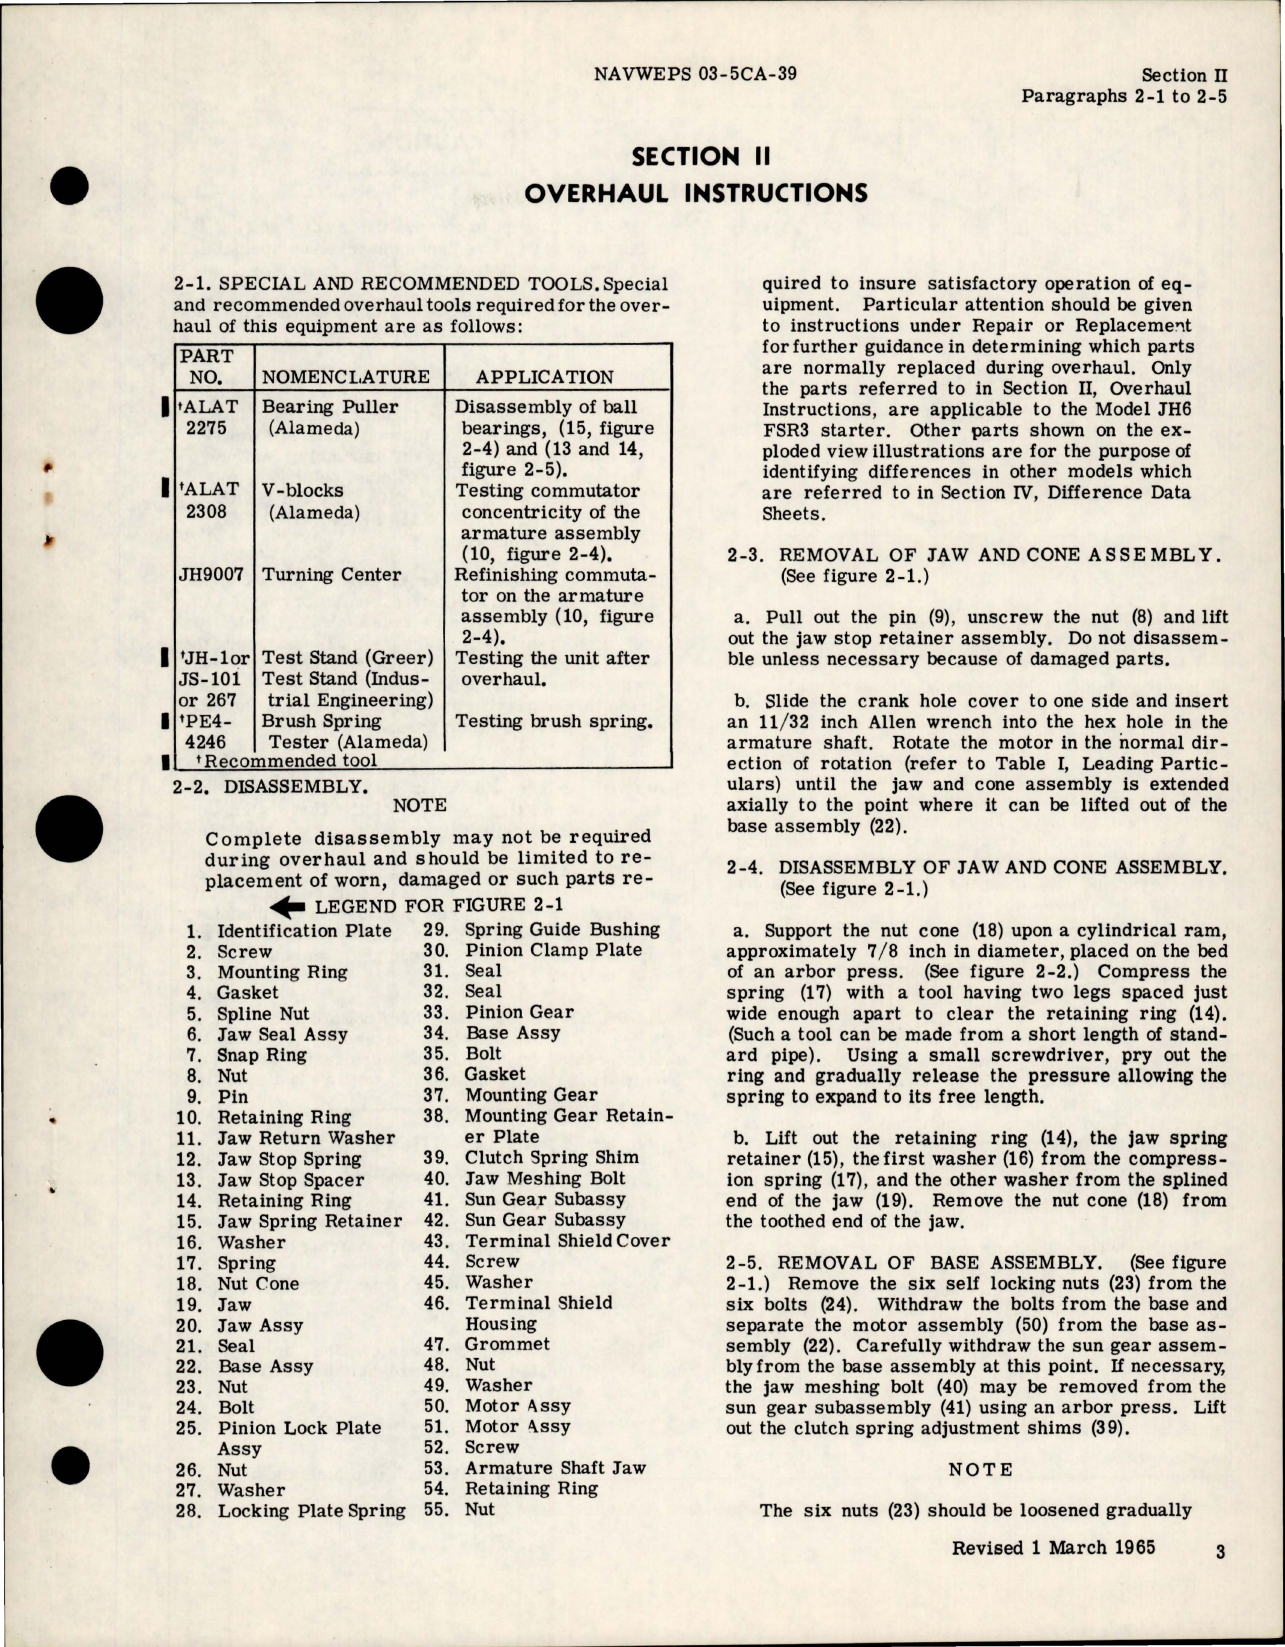 Sample page 7 from AirCorps Library document: Overhaul Instructions for Aircraft Engine Starters 